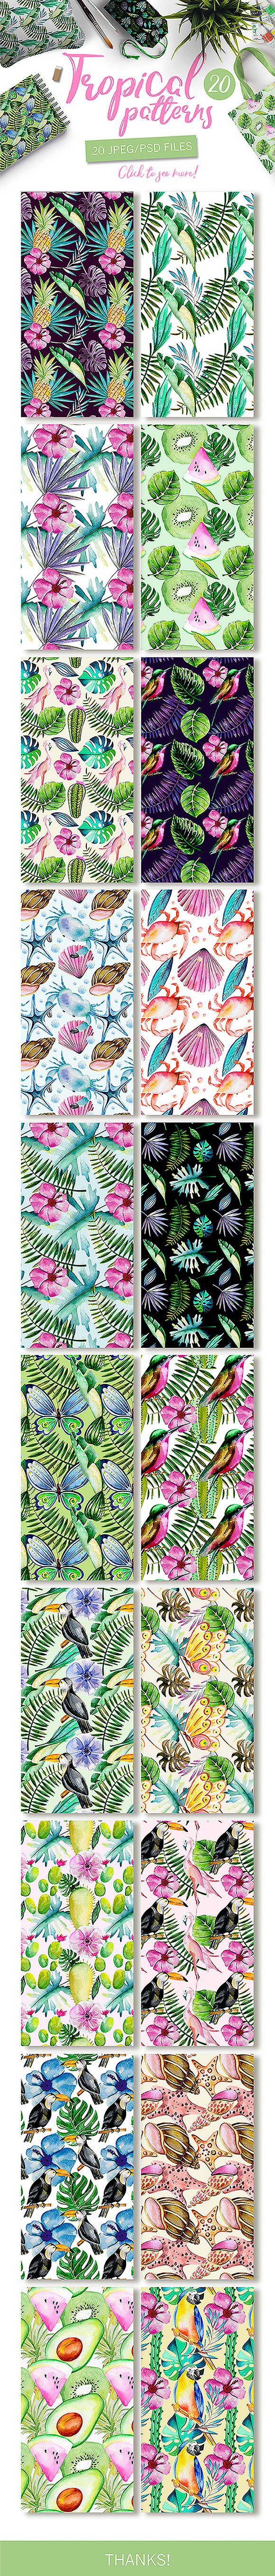 Watercolor Tropical Patterns in Patterns - product preview 3